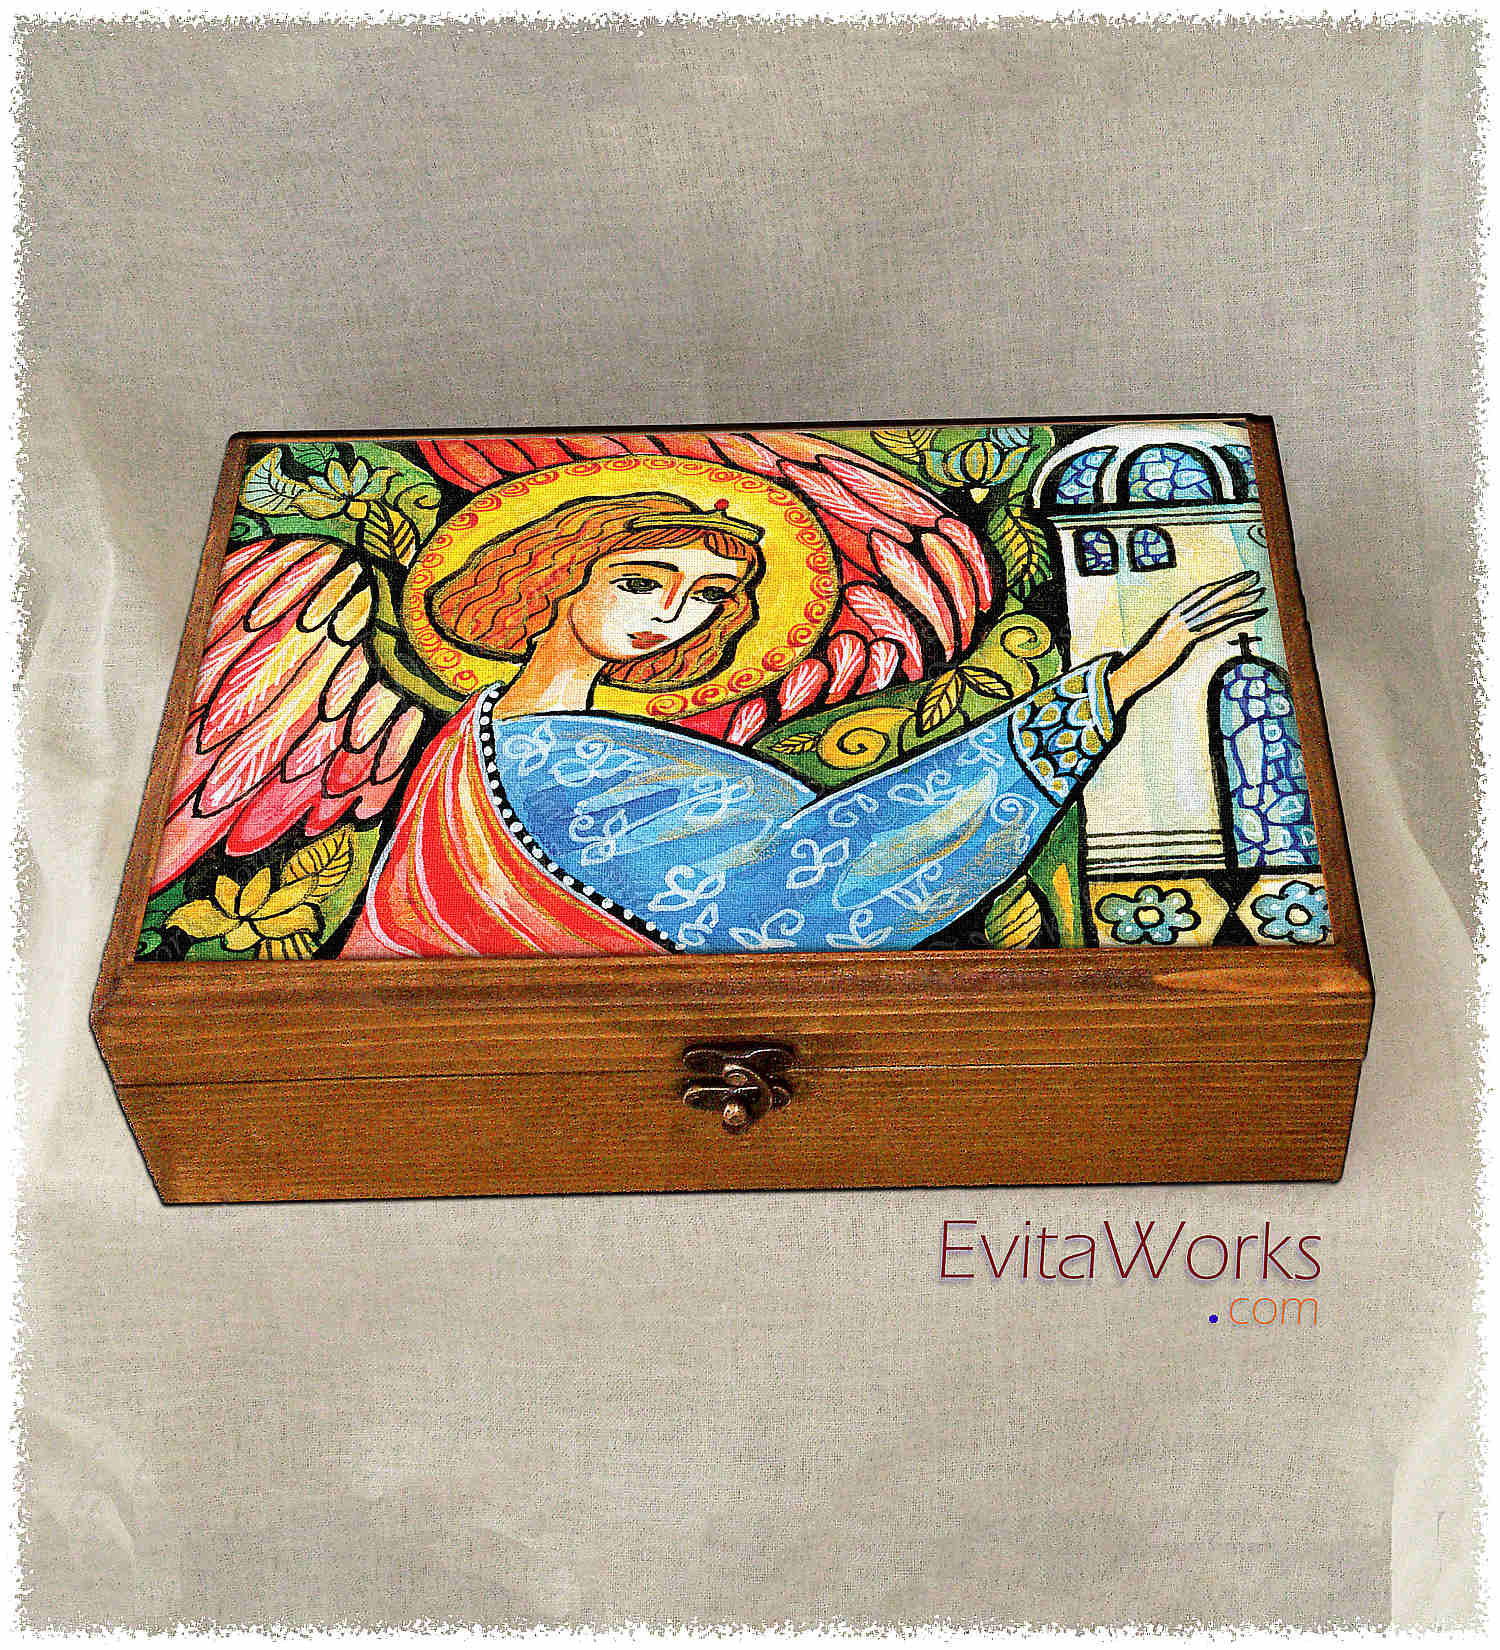 Hit to learn about "Angel 34, Christian art" on jewelboxes